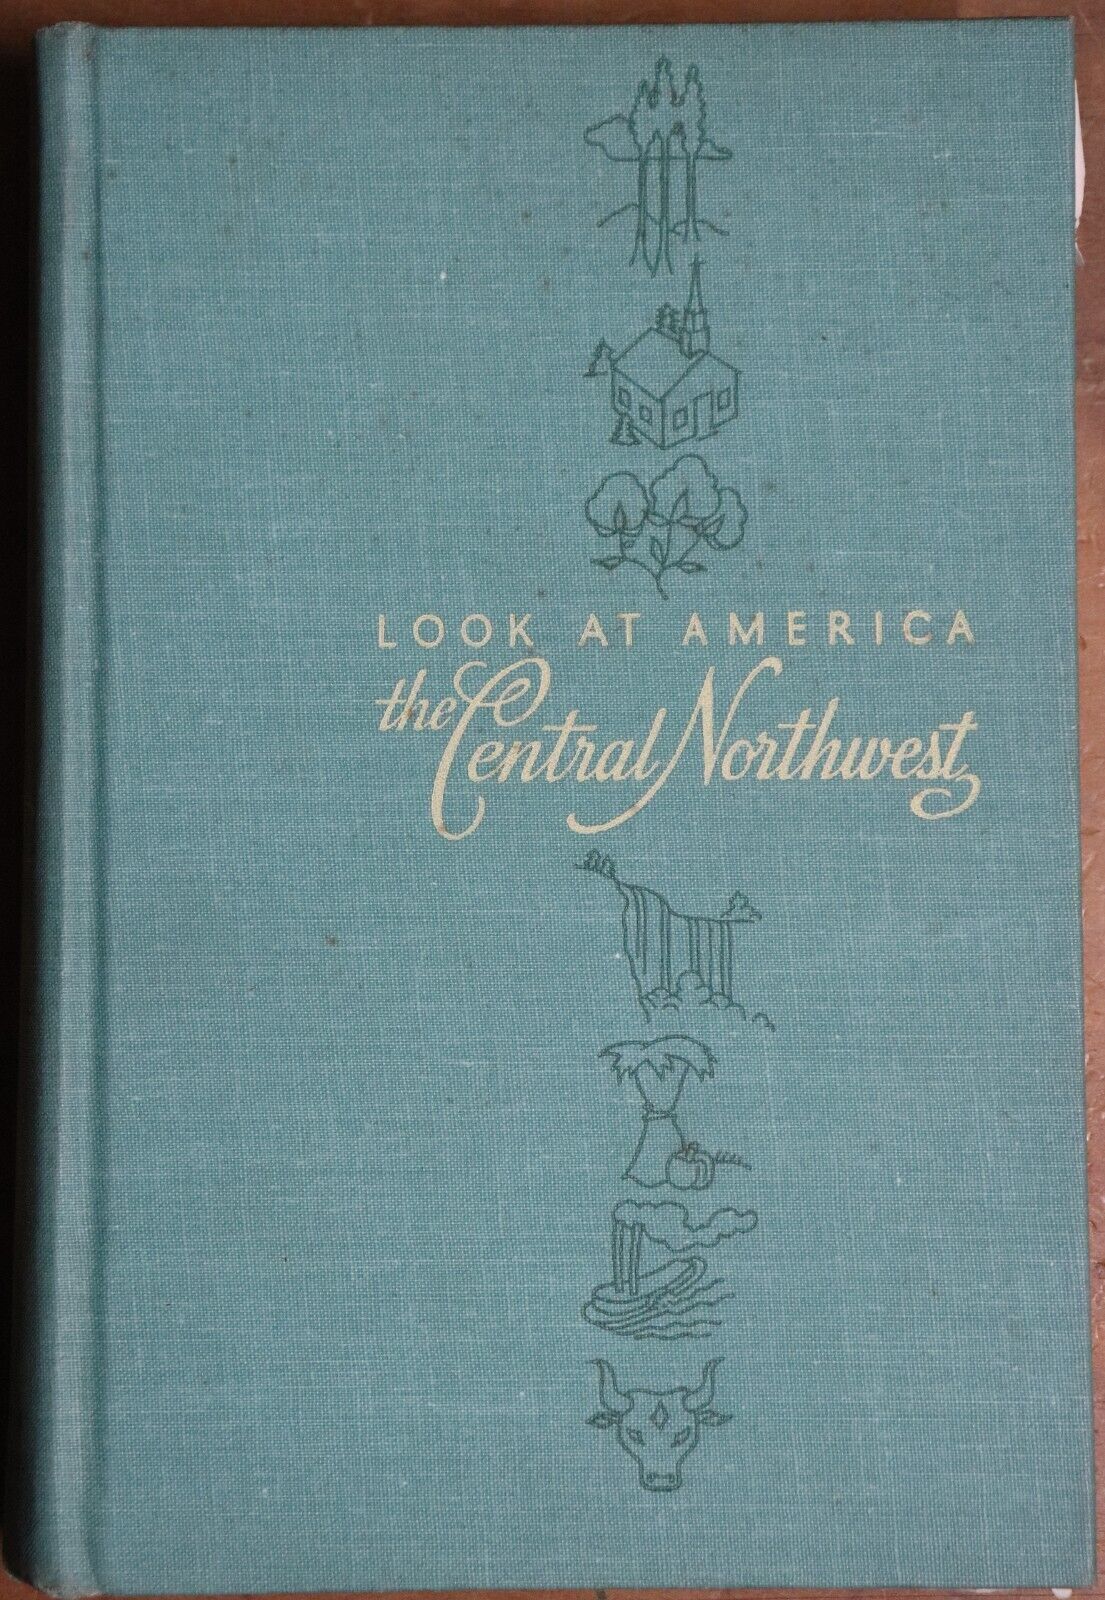 Look at America: The Central Northwest - 1947 - 1st Edition Vintage Book